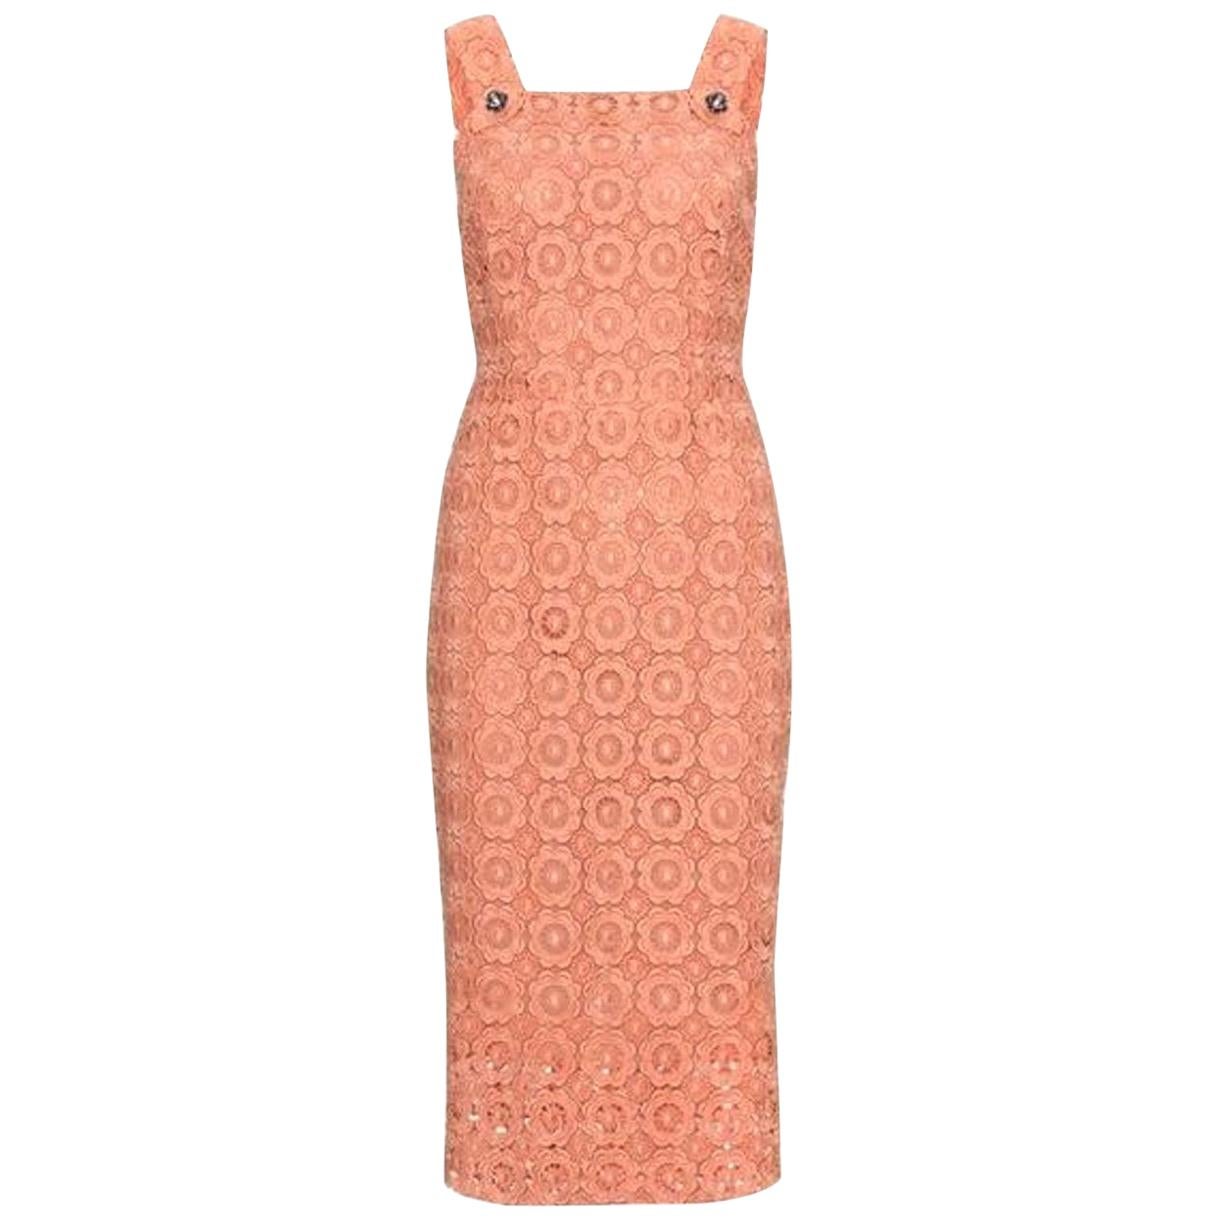 Stunning Dolce & Gabbana Coral Eyelet Shift Dress with Jeweled Button Details